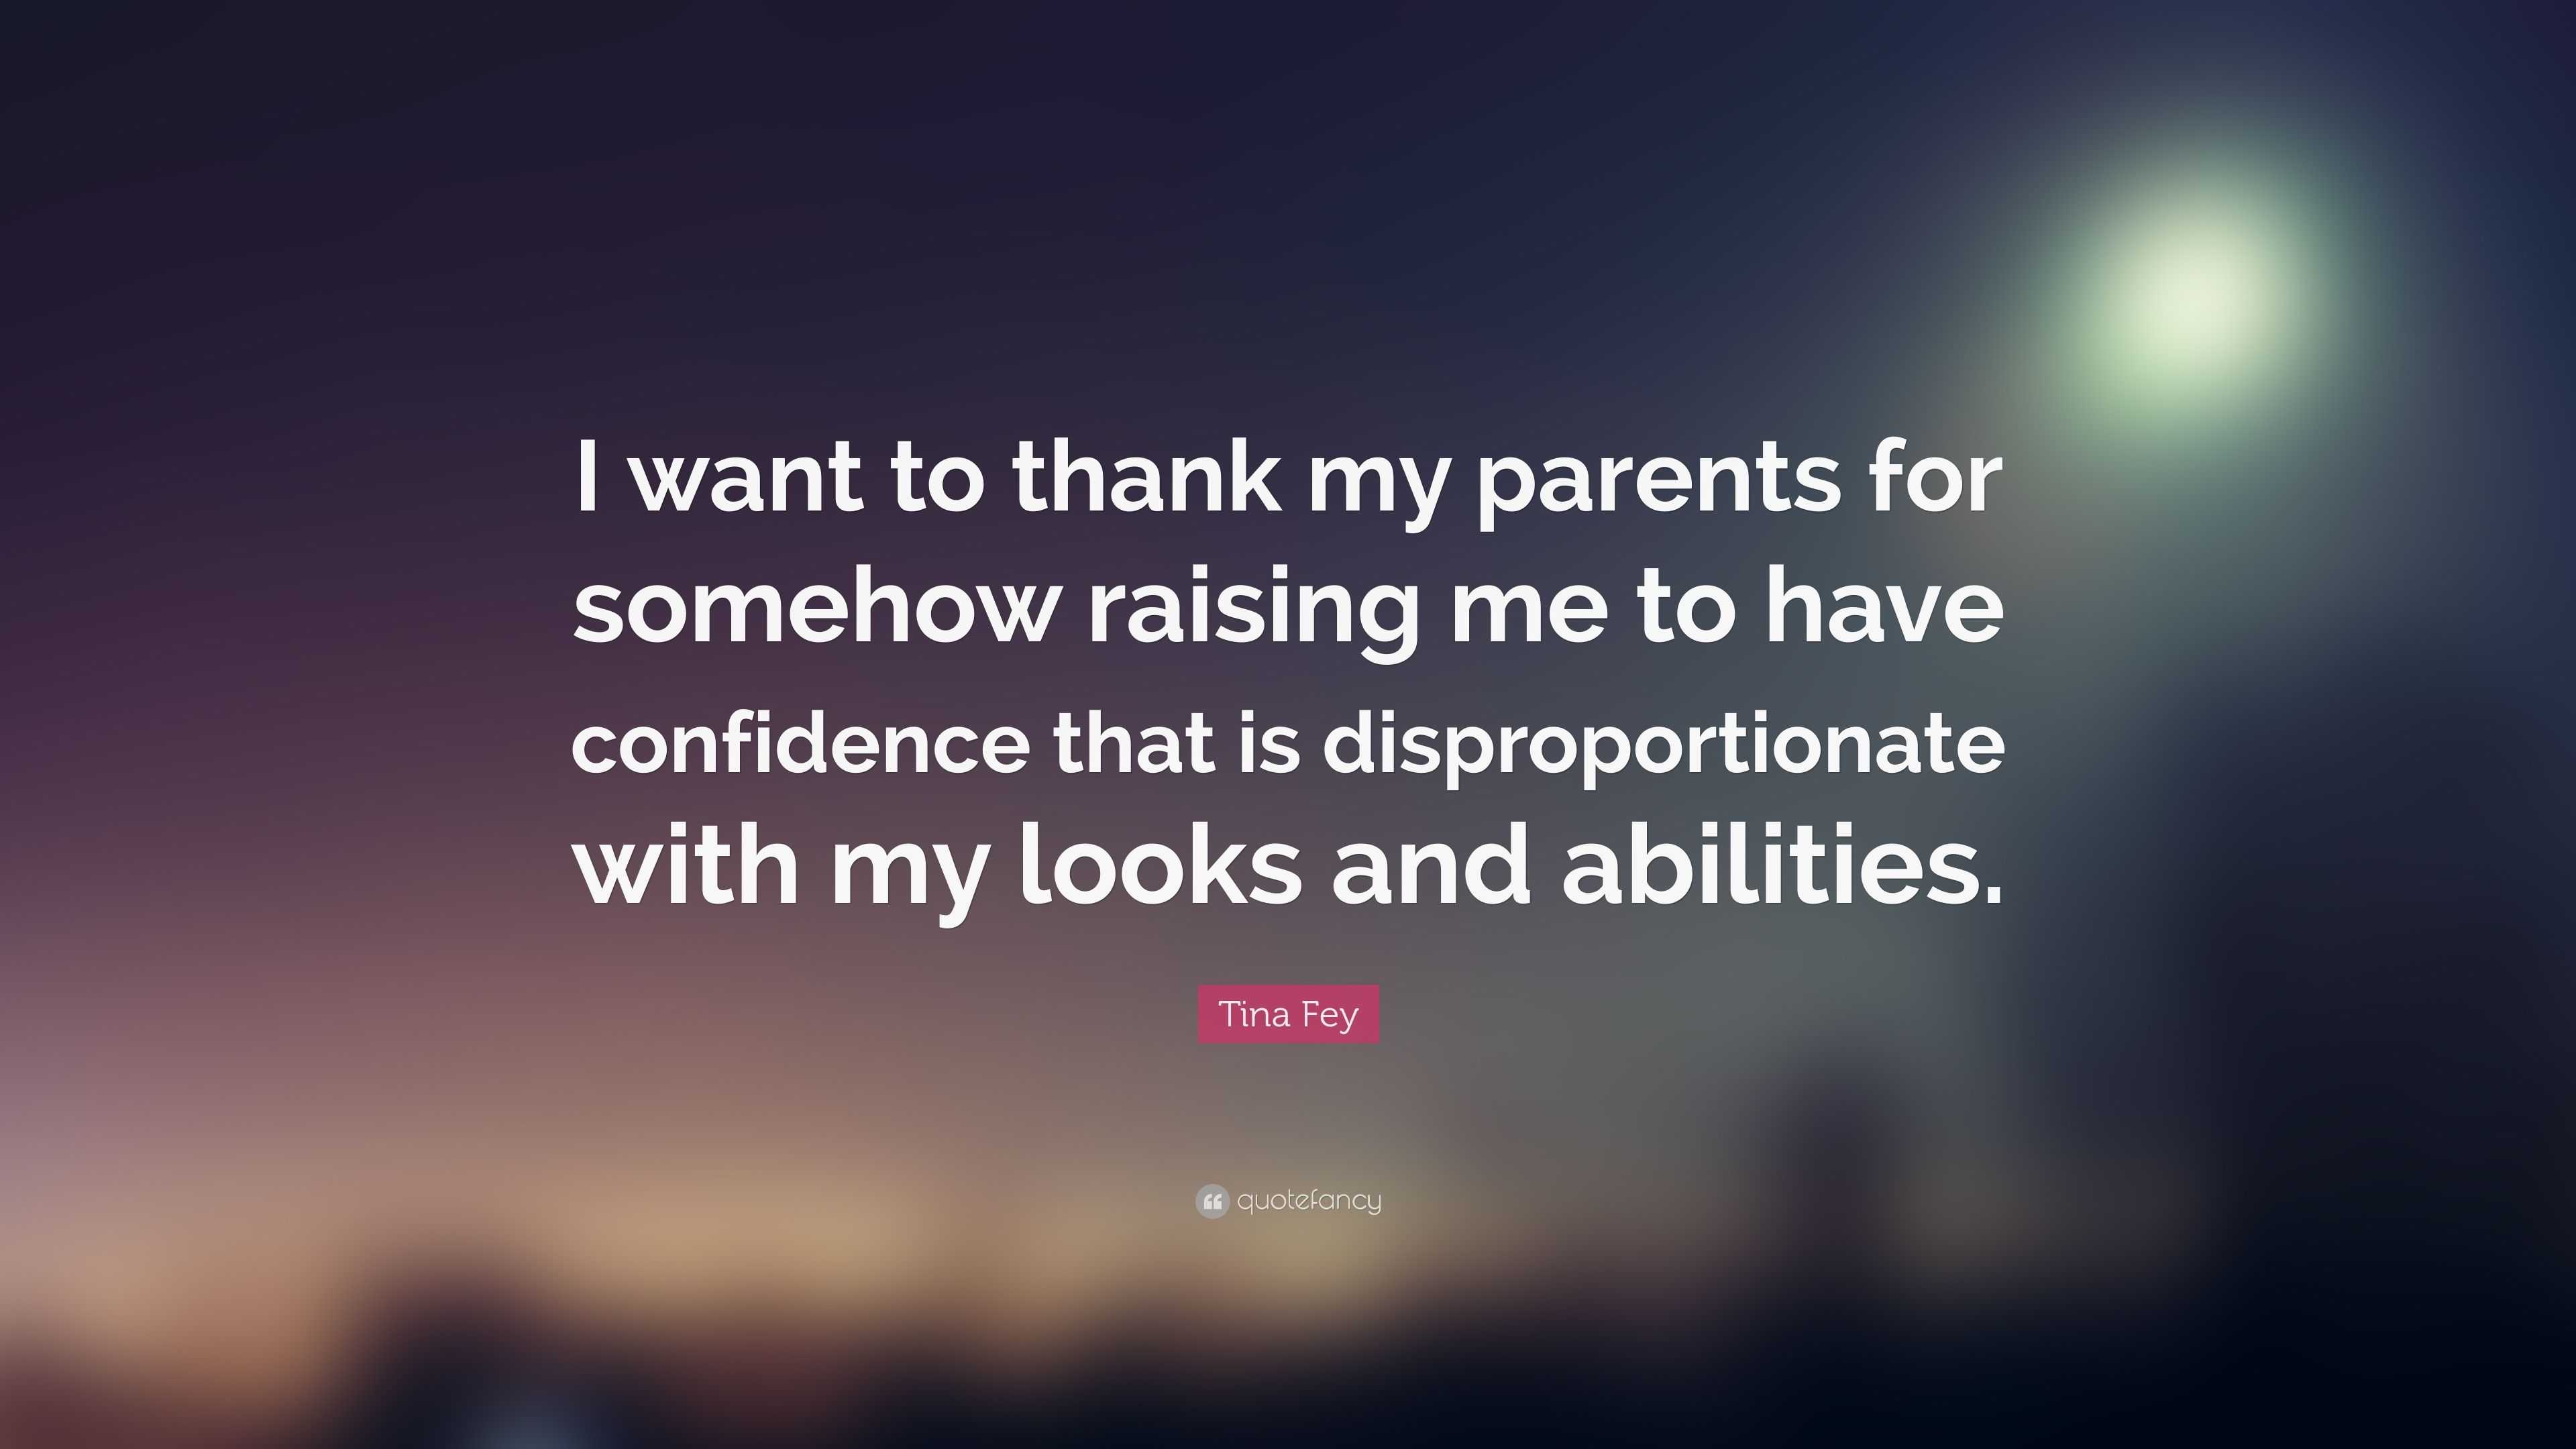 tina-fey-quote-i-want-to-thank-my-parents-for-somehow-raising-me-to-have-confidence-that-is